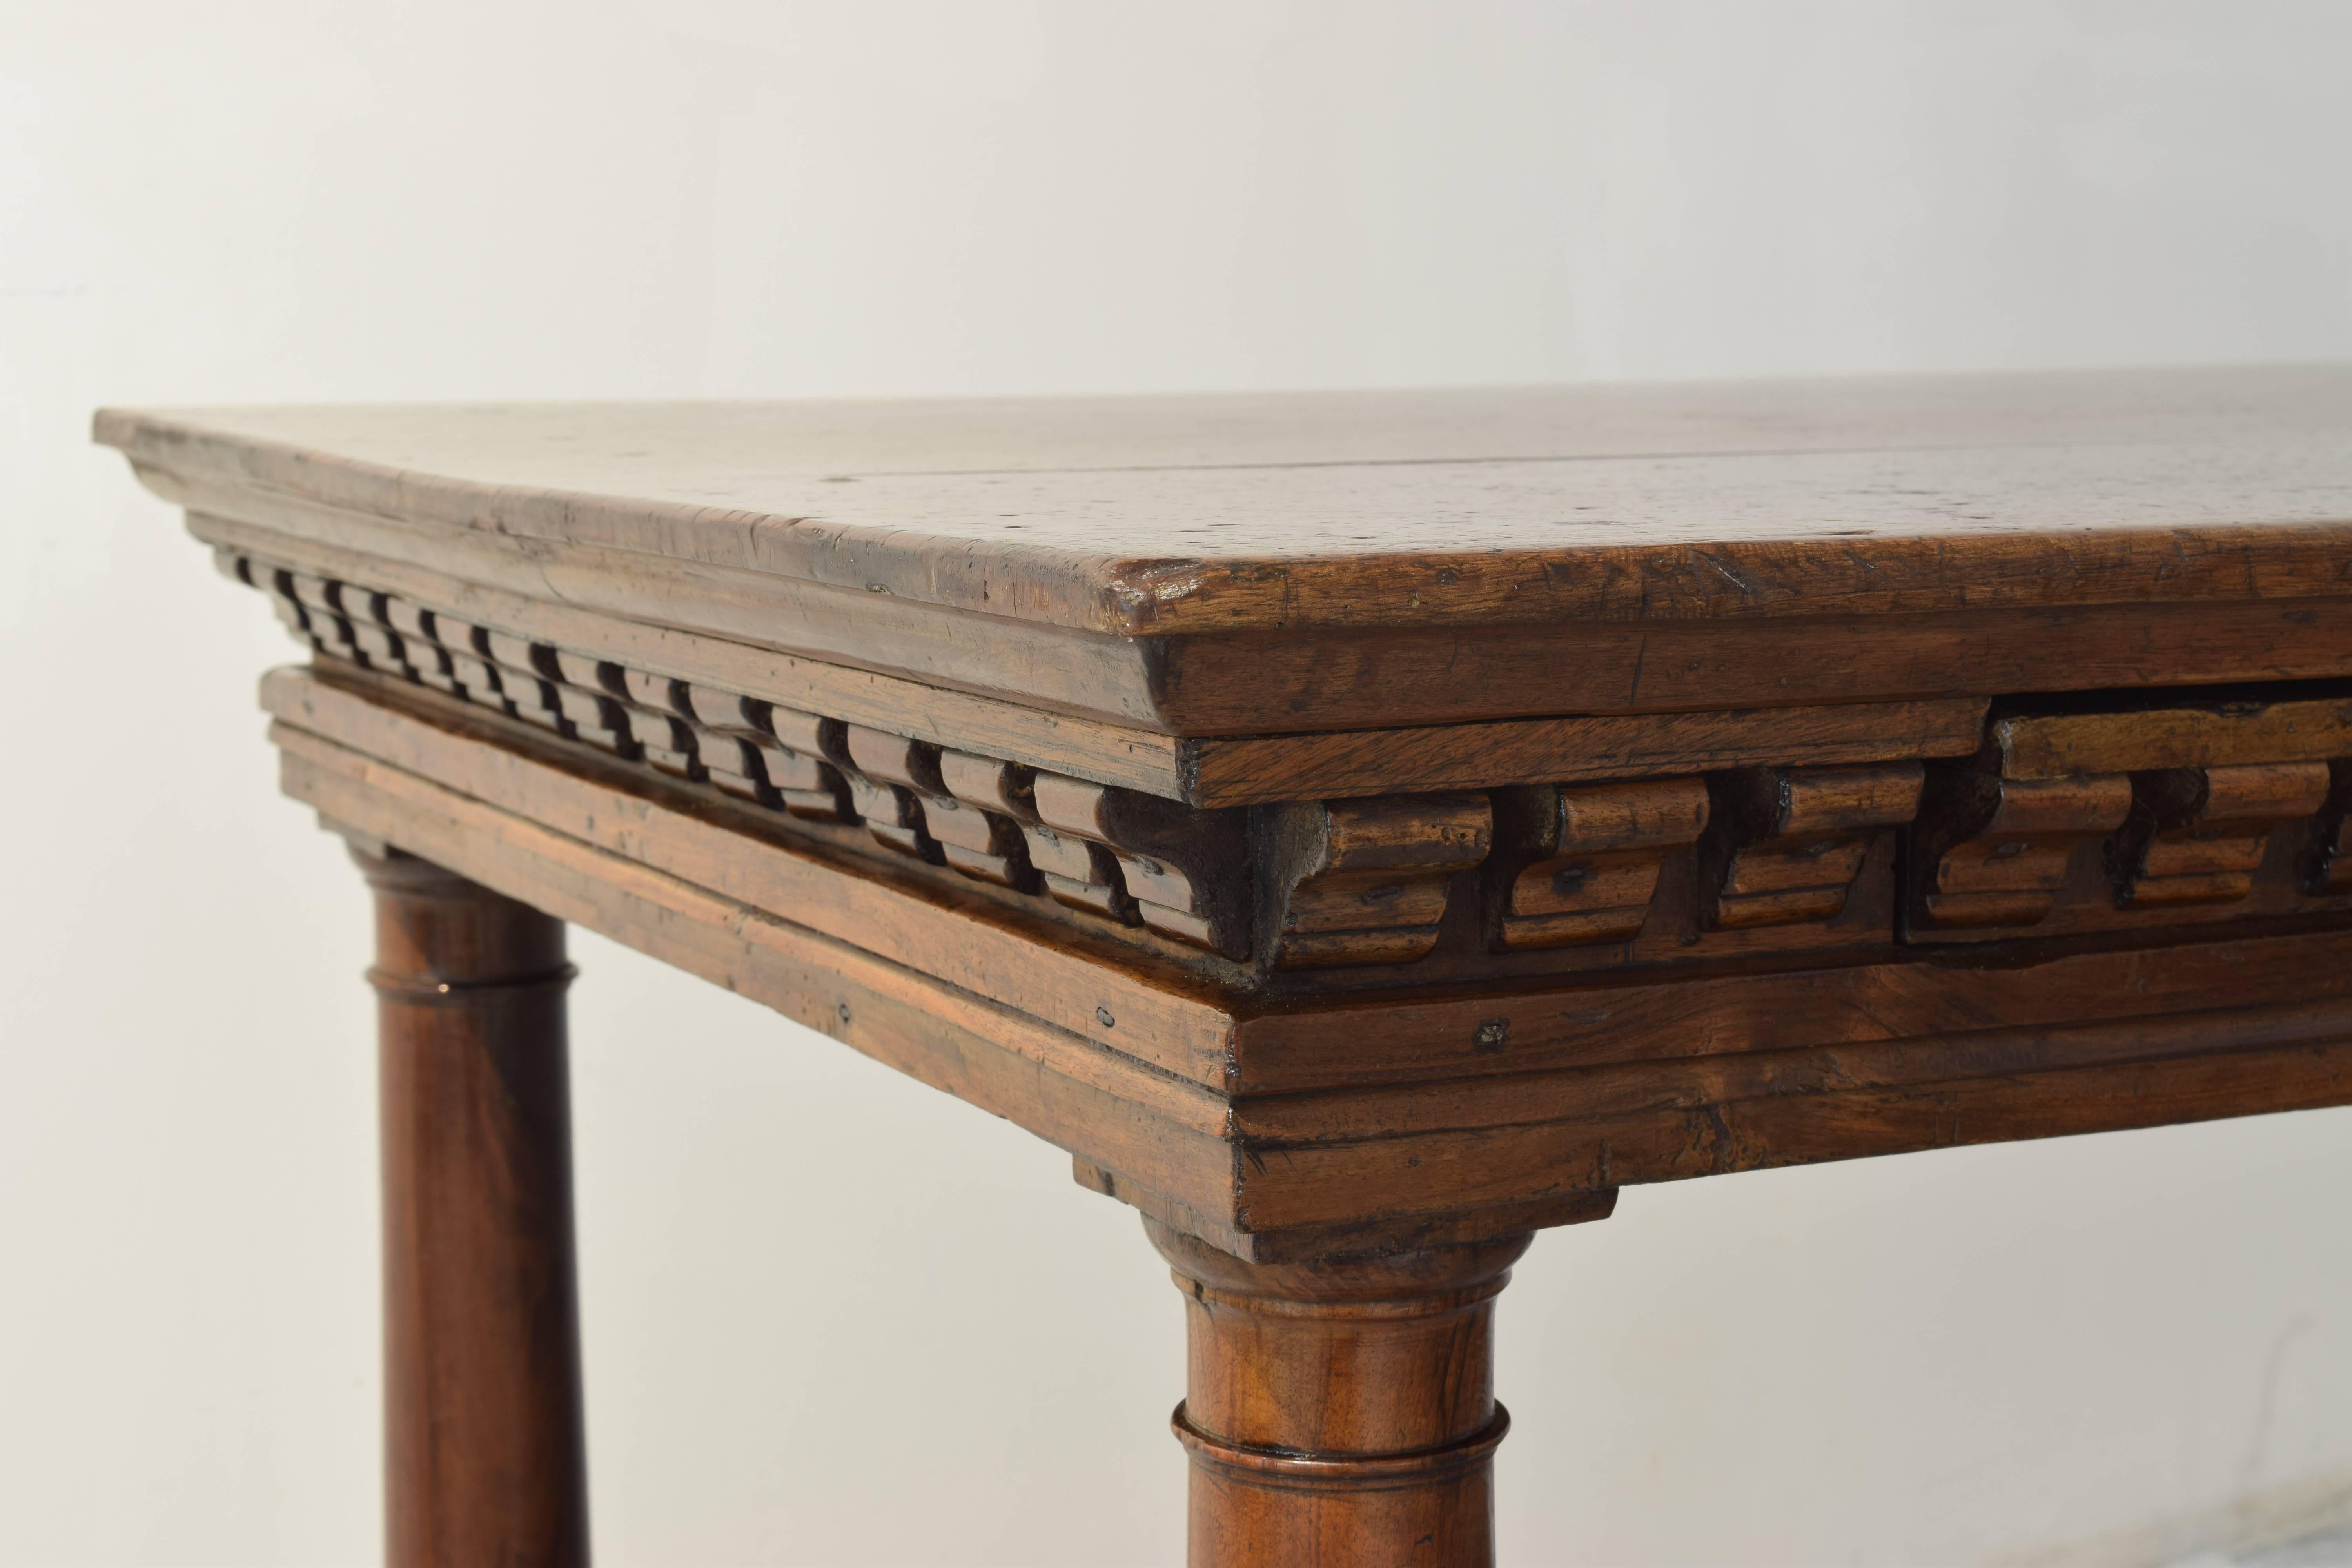 Late 17th Century Italian Baroque Walnut Centre or Hall Table, Late 17th-Early 18th Century